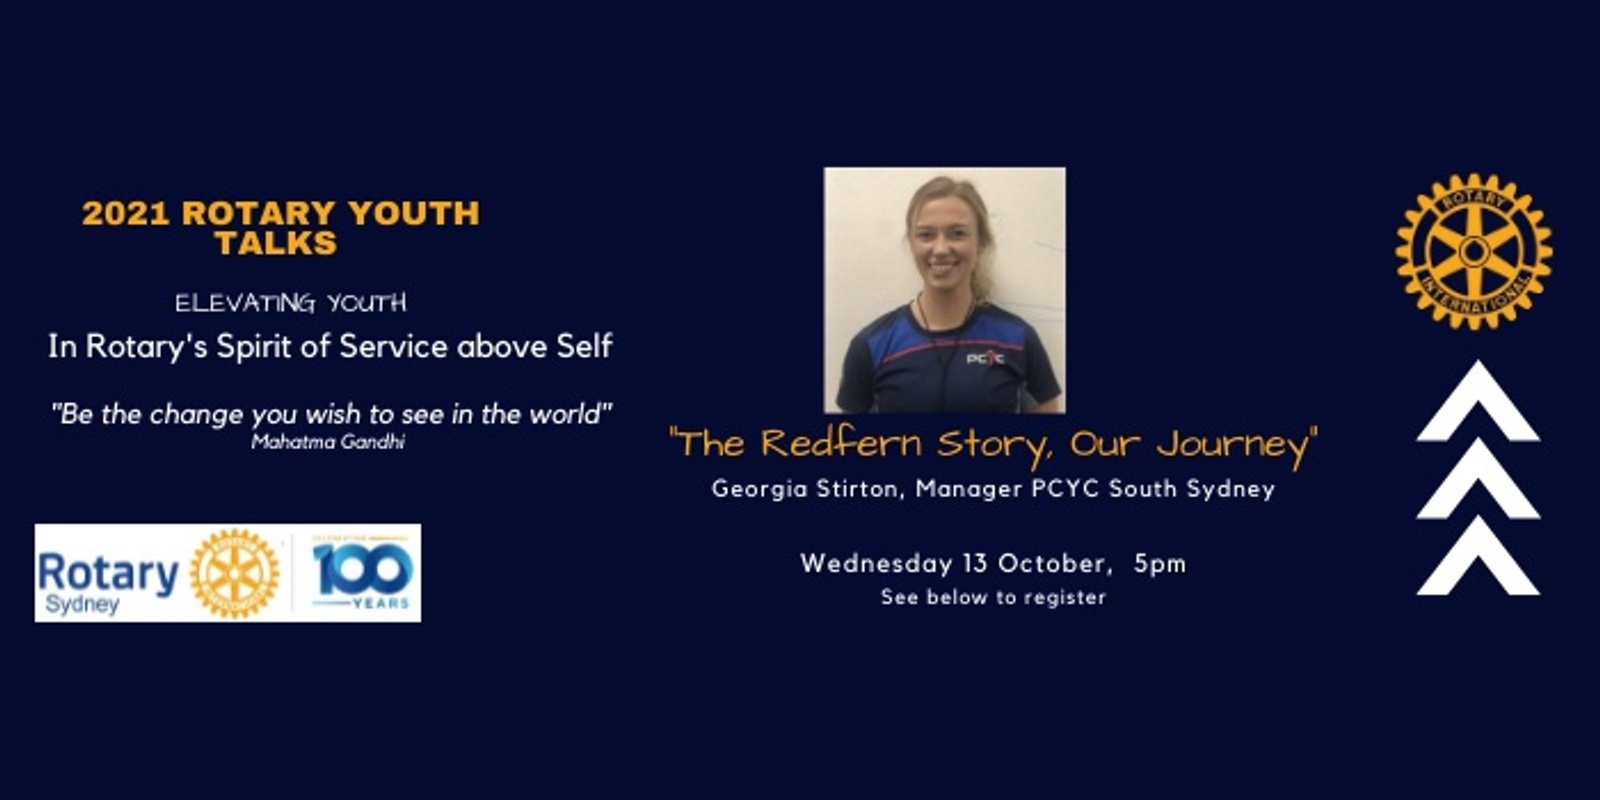 Rotary Youth Talk:  "The Redfern Story, our Journey"  Georgia Stirton, Manager  PCYC South Sydney